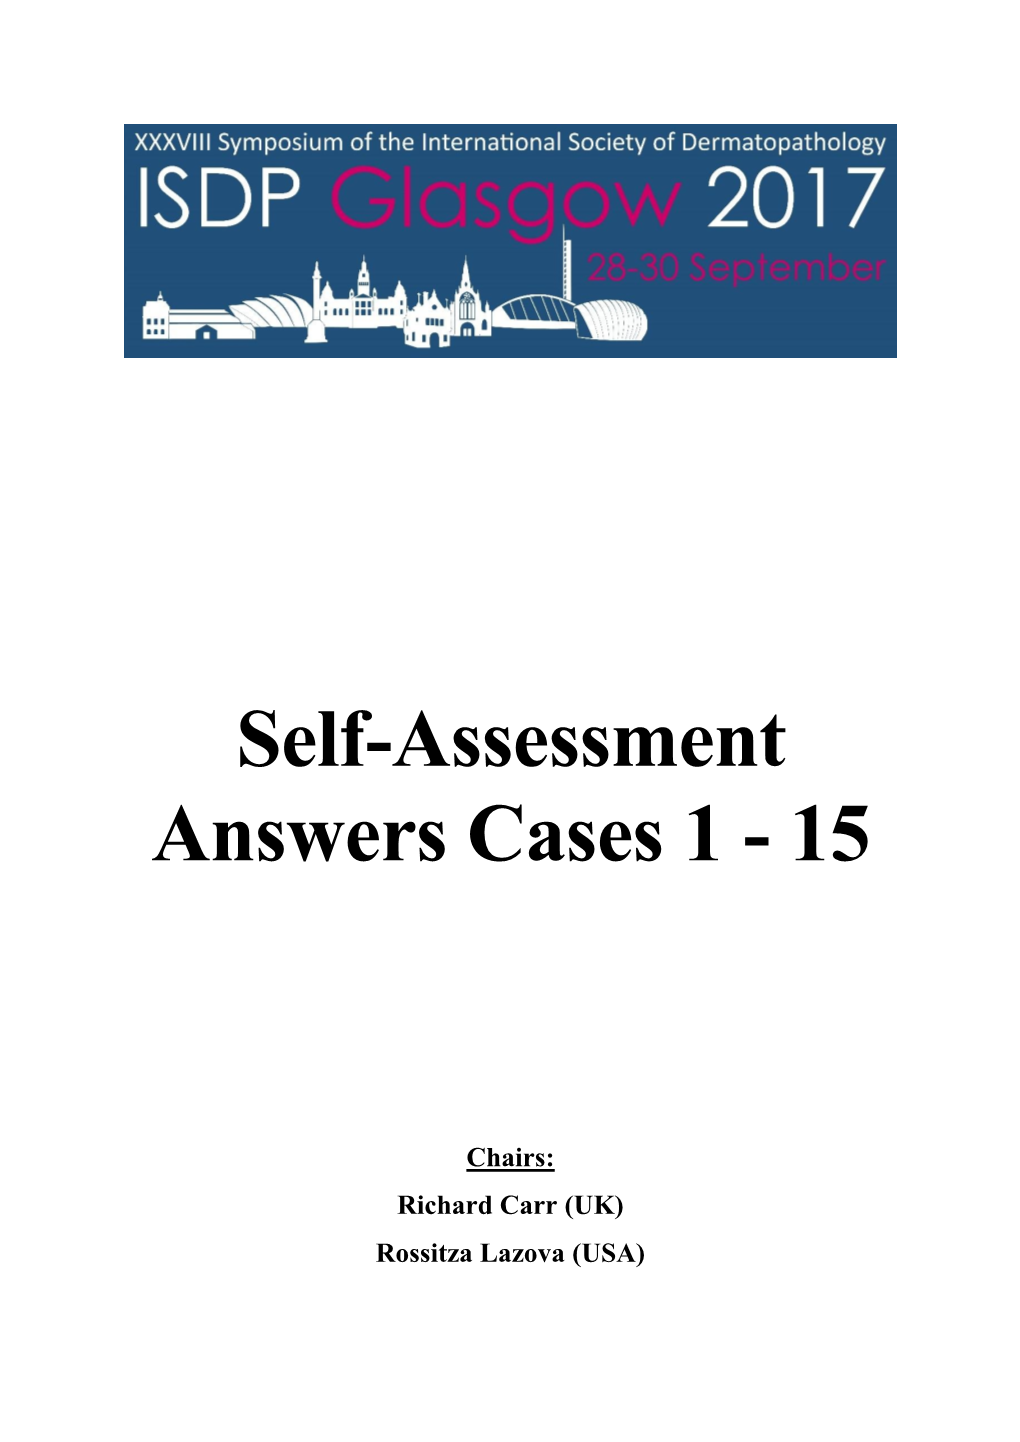 Self-Assessment Answers Cases 1 - 15